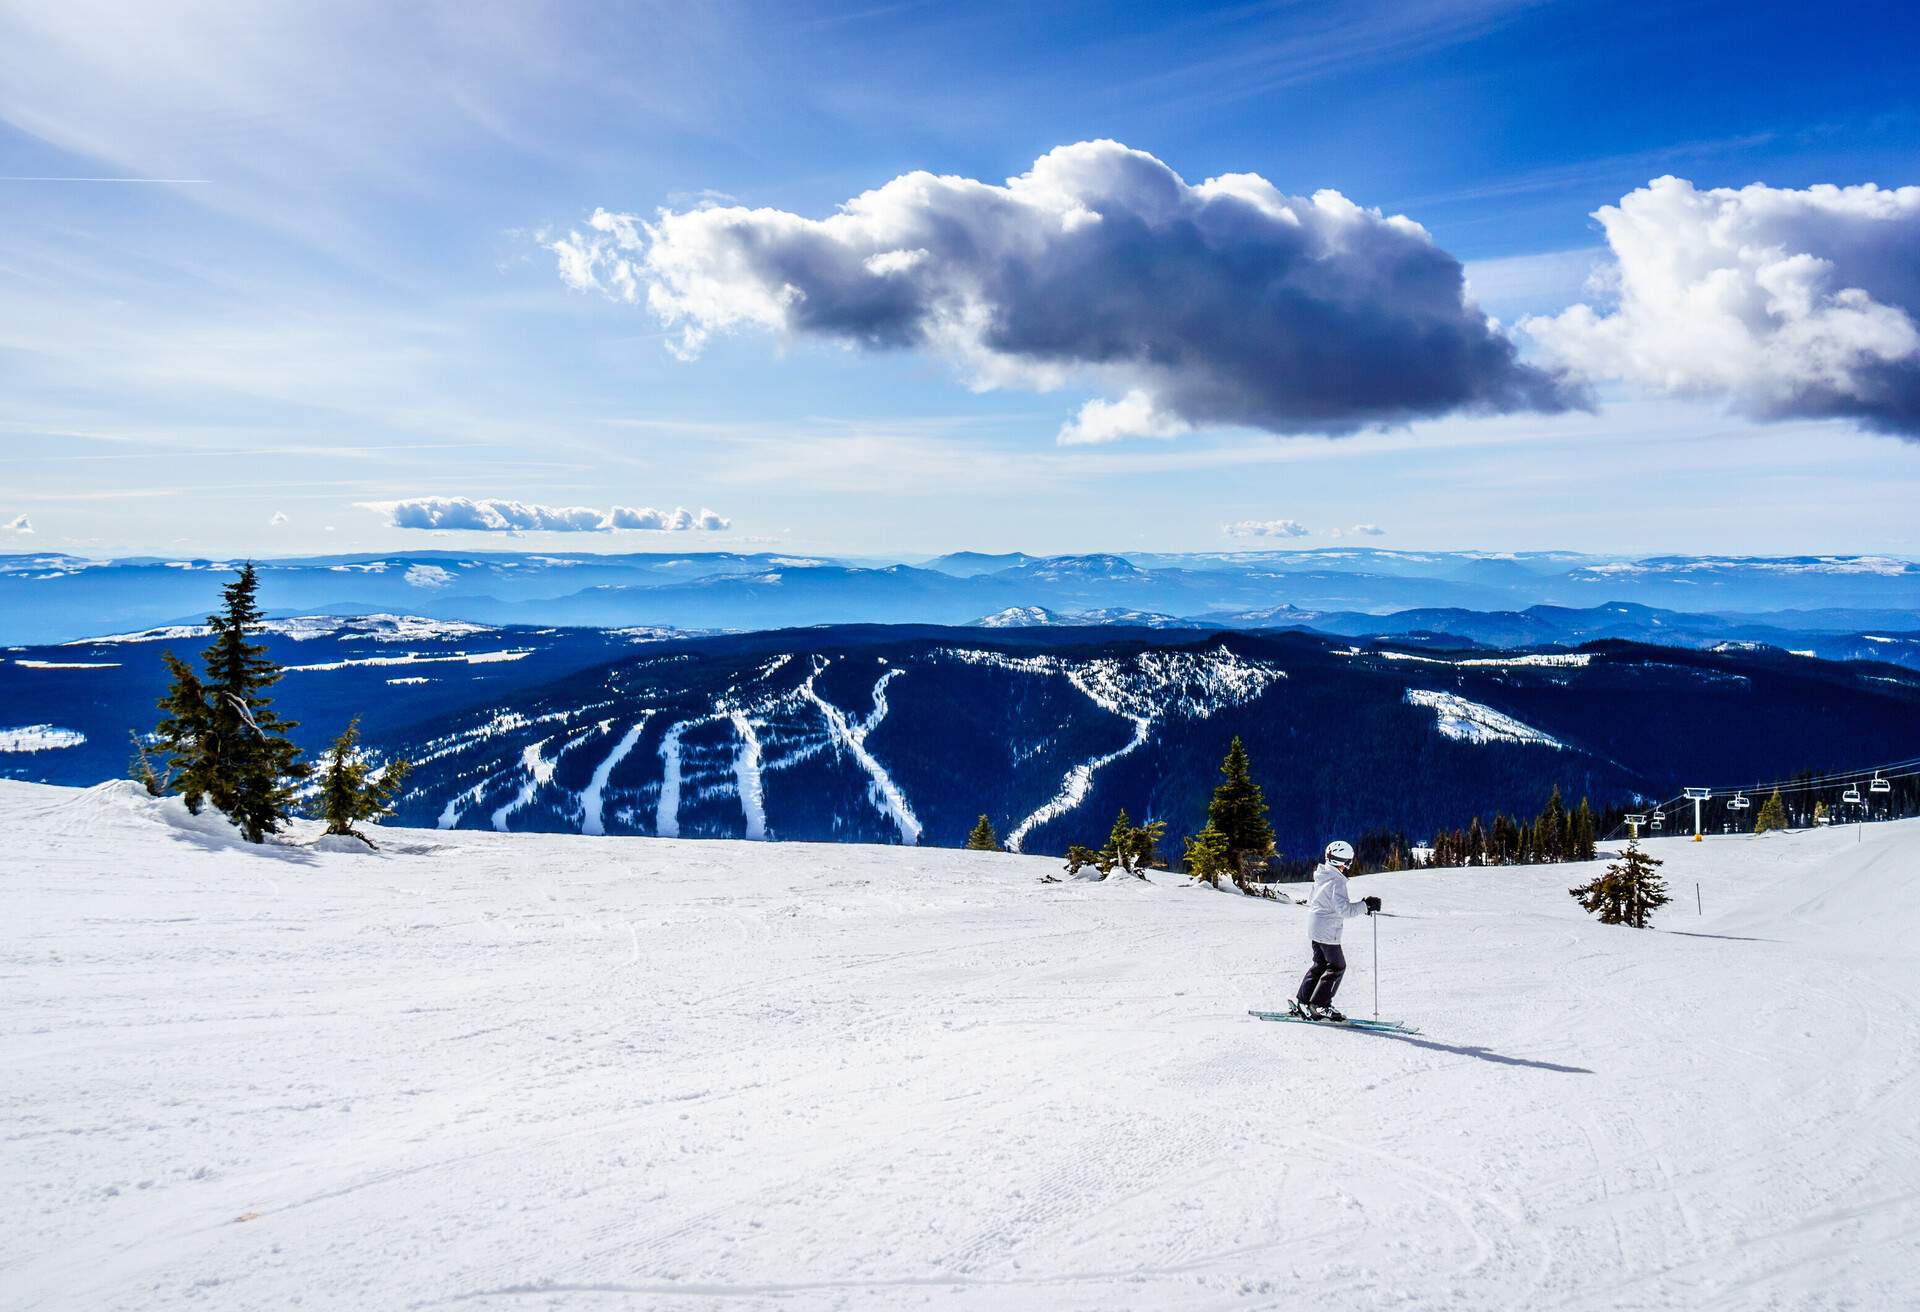 A skier skiing powder snow while looking at the bluish mountains and the sky.